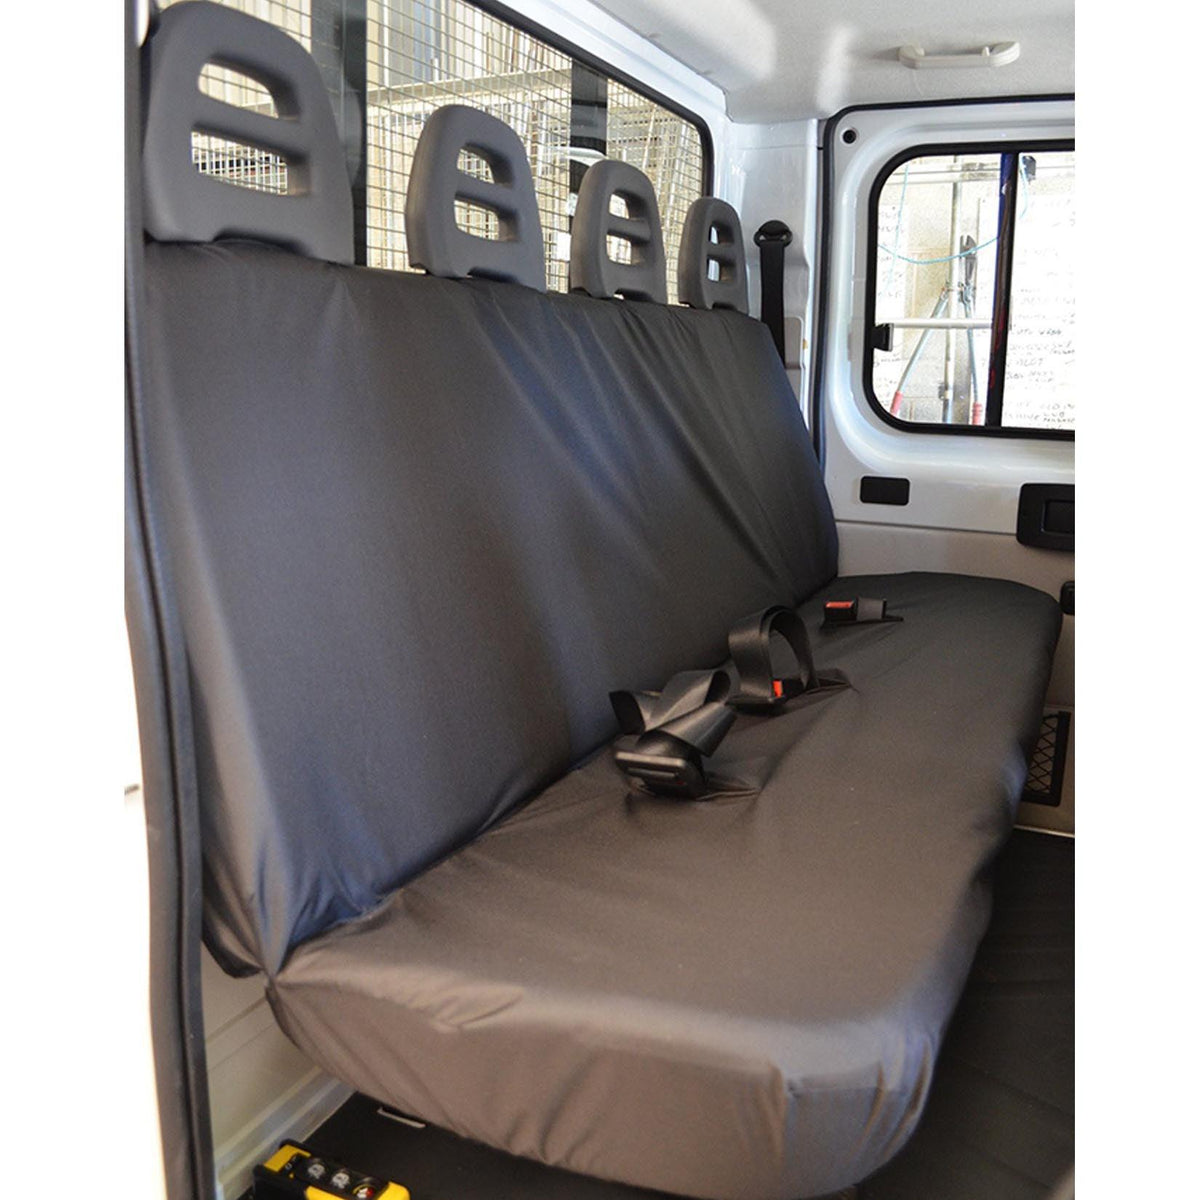 FIAT DUCATO VAN 2006 ON CHASSIS CAB REAR SEAT COVERS – BLACK - Storm Xccessories2